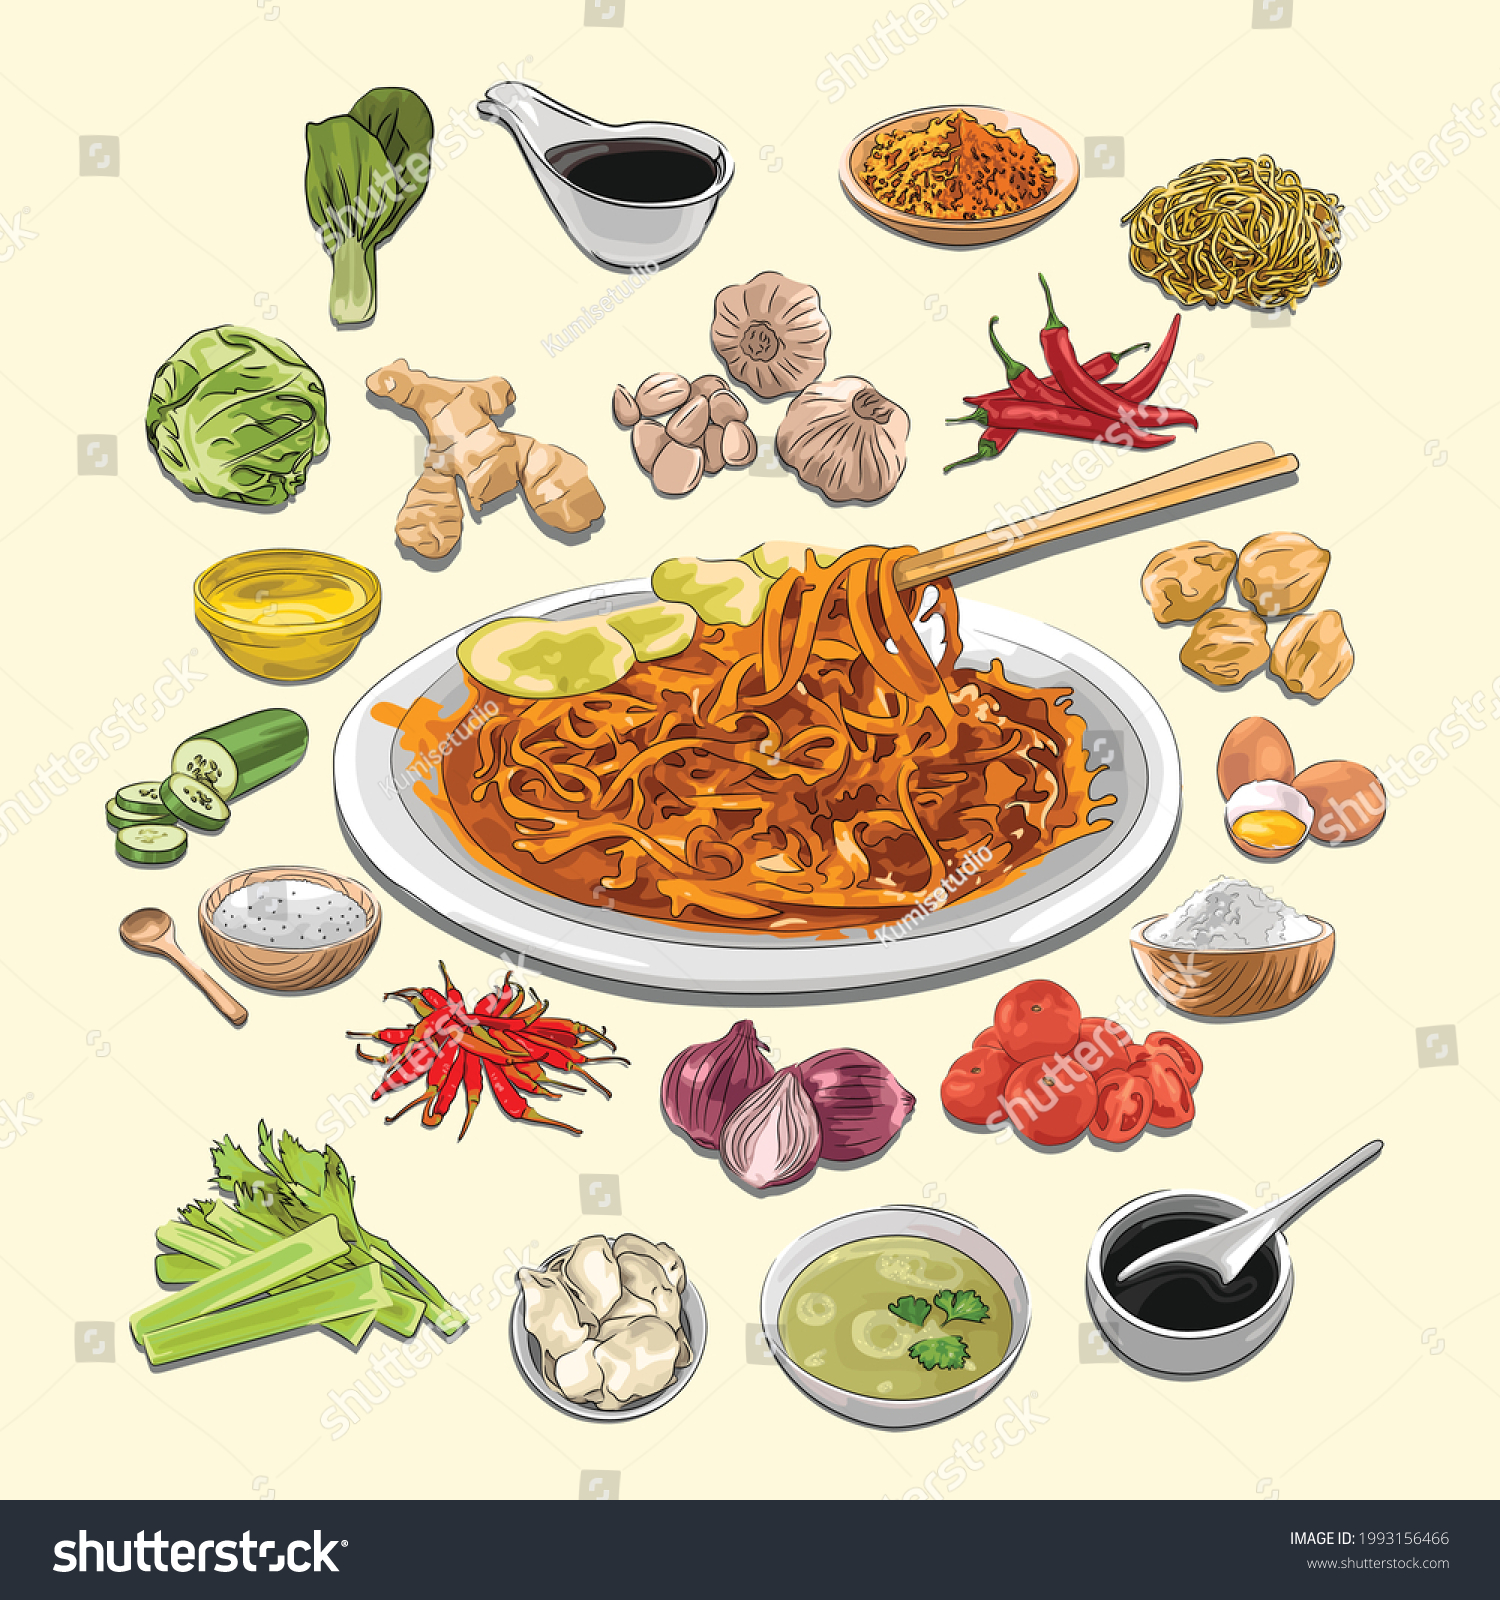 SVG of Mie Aceh And Ingredients Illustration, Sketch And Vector Style, Traditional Food From Aceh, Good to use for restaurant menu, Indonesian food recipe book, and food content. svg